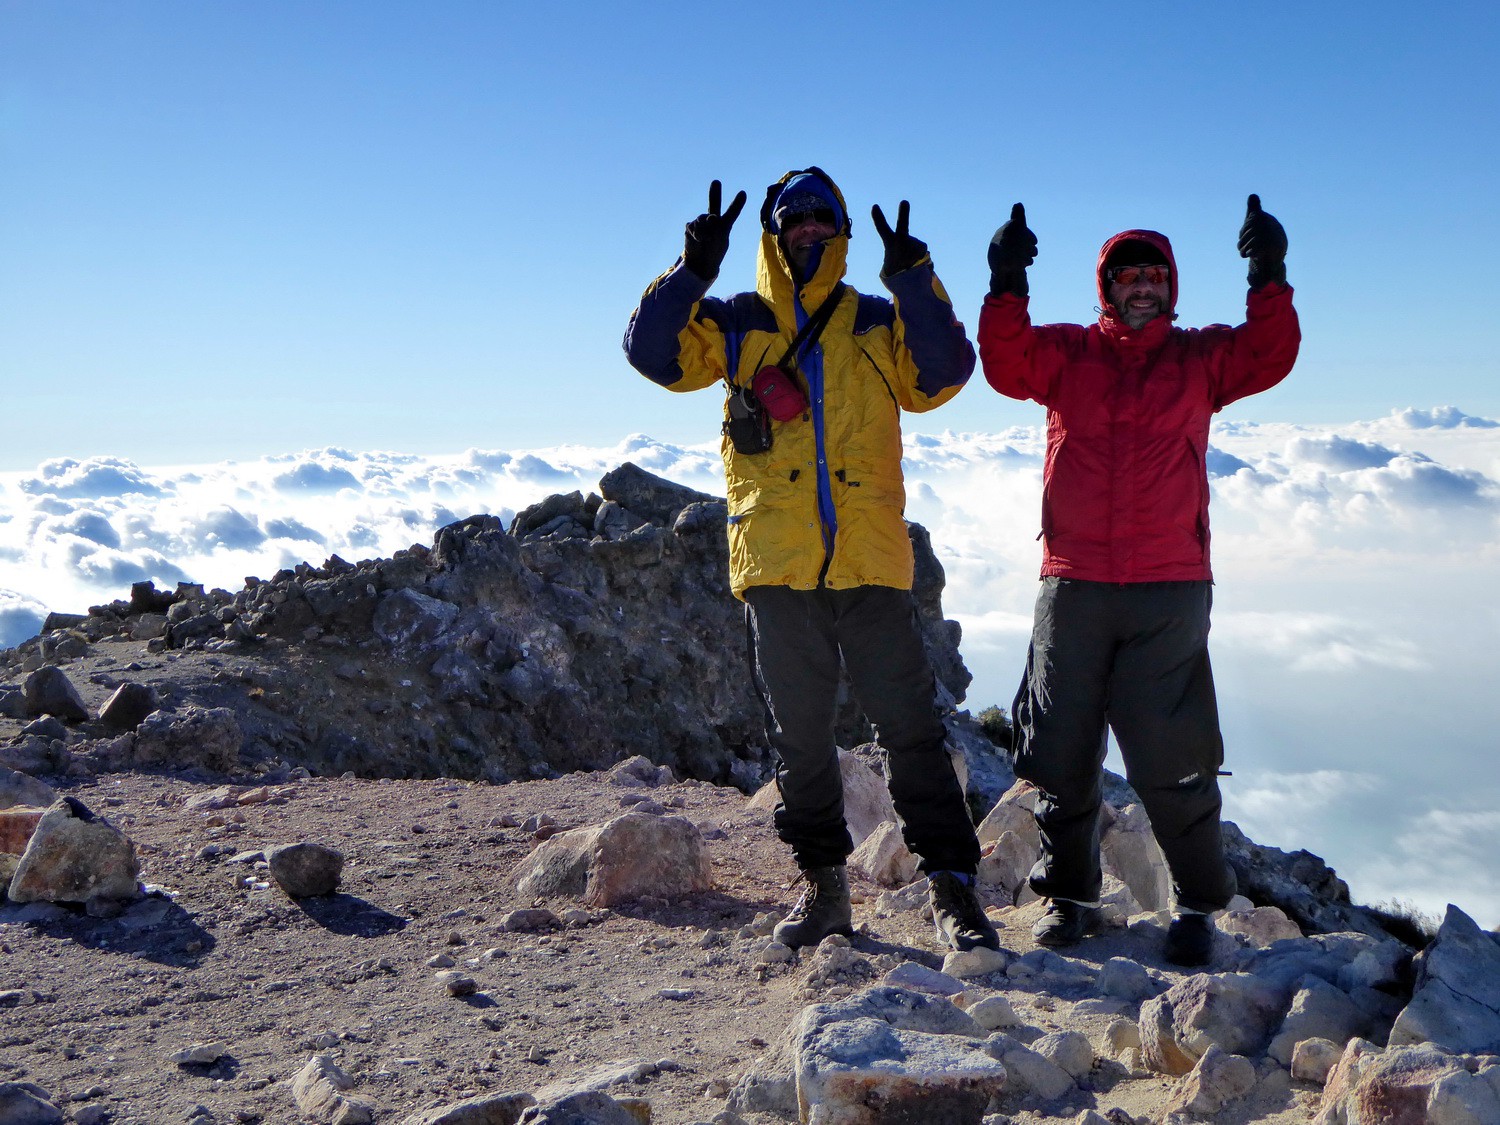 Alfred and Tommy on the summit of Volcan Tajumulco which is with 4220 meters sea-level the highest point of Central America